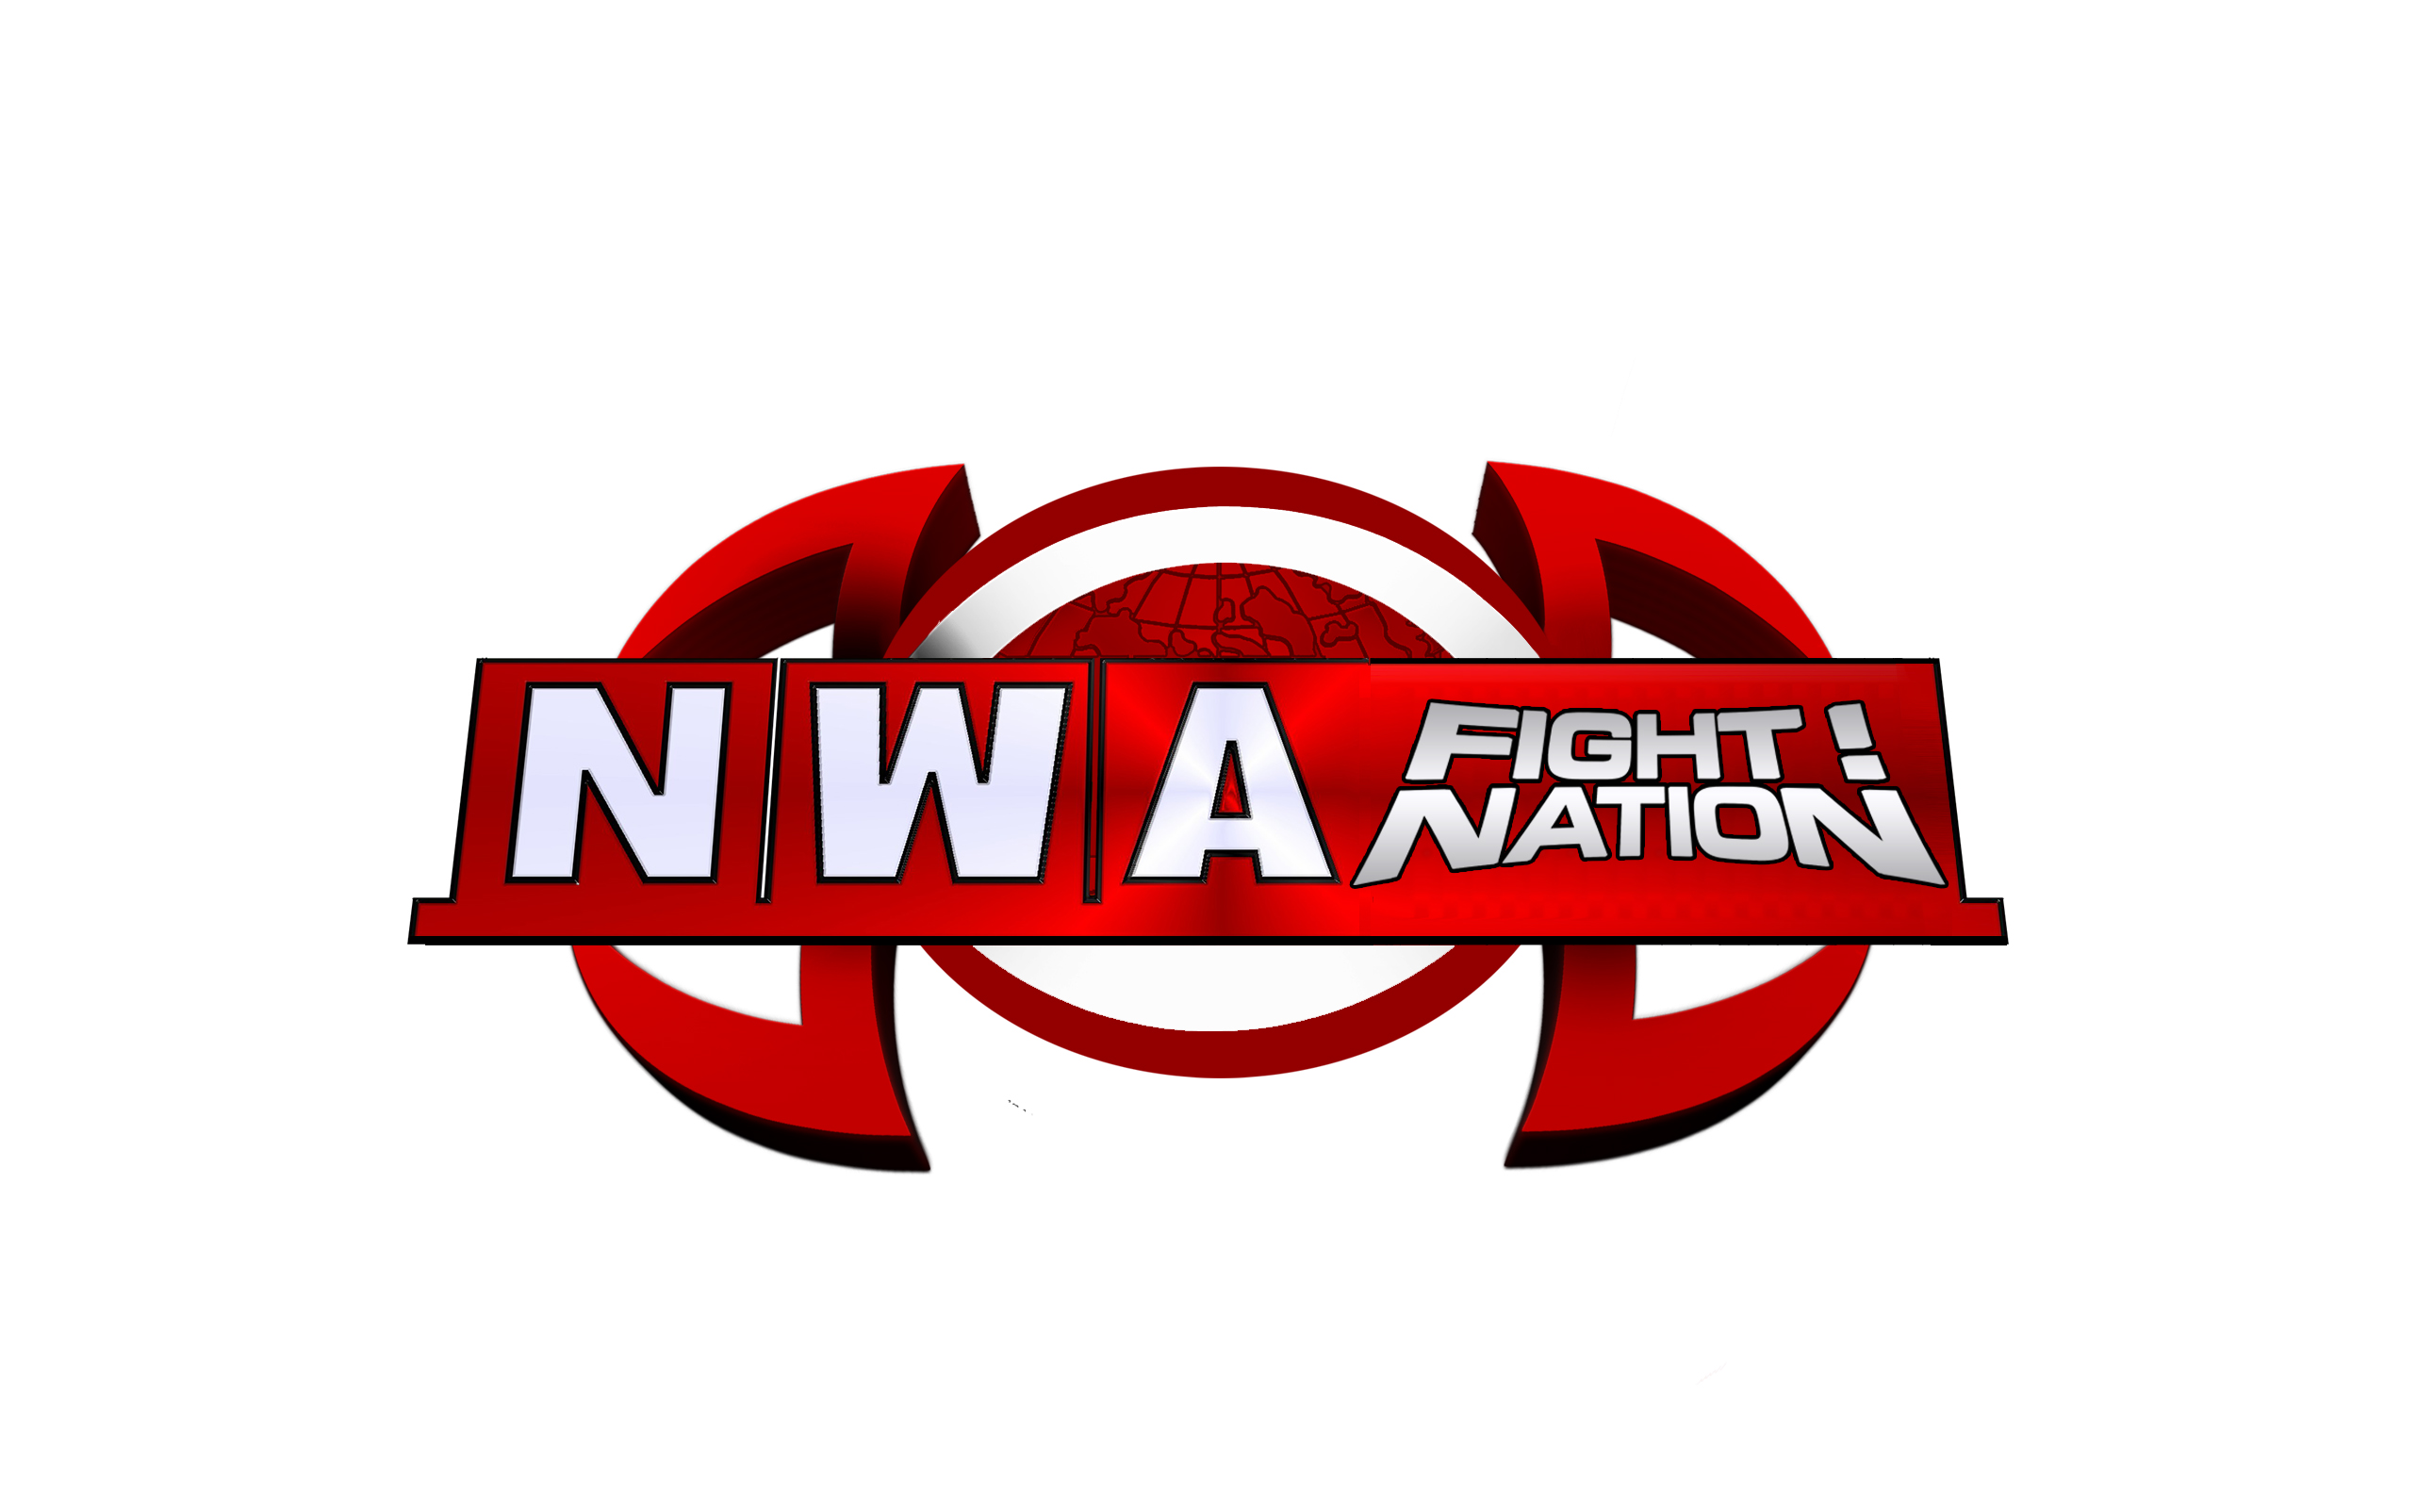 FIGHT! NATION joins the NWA